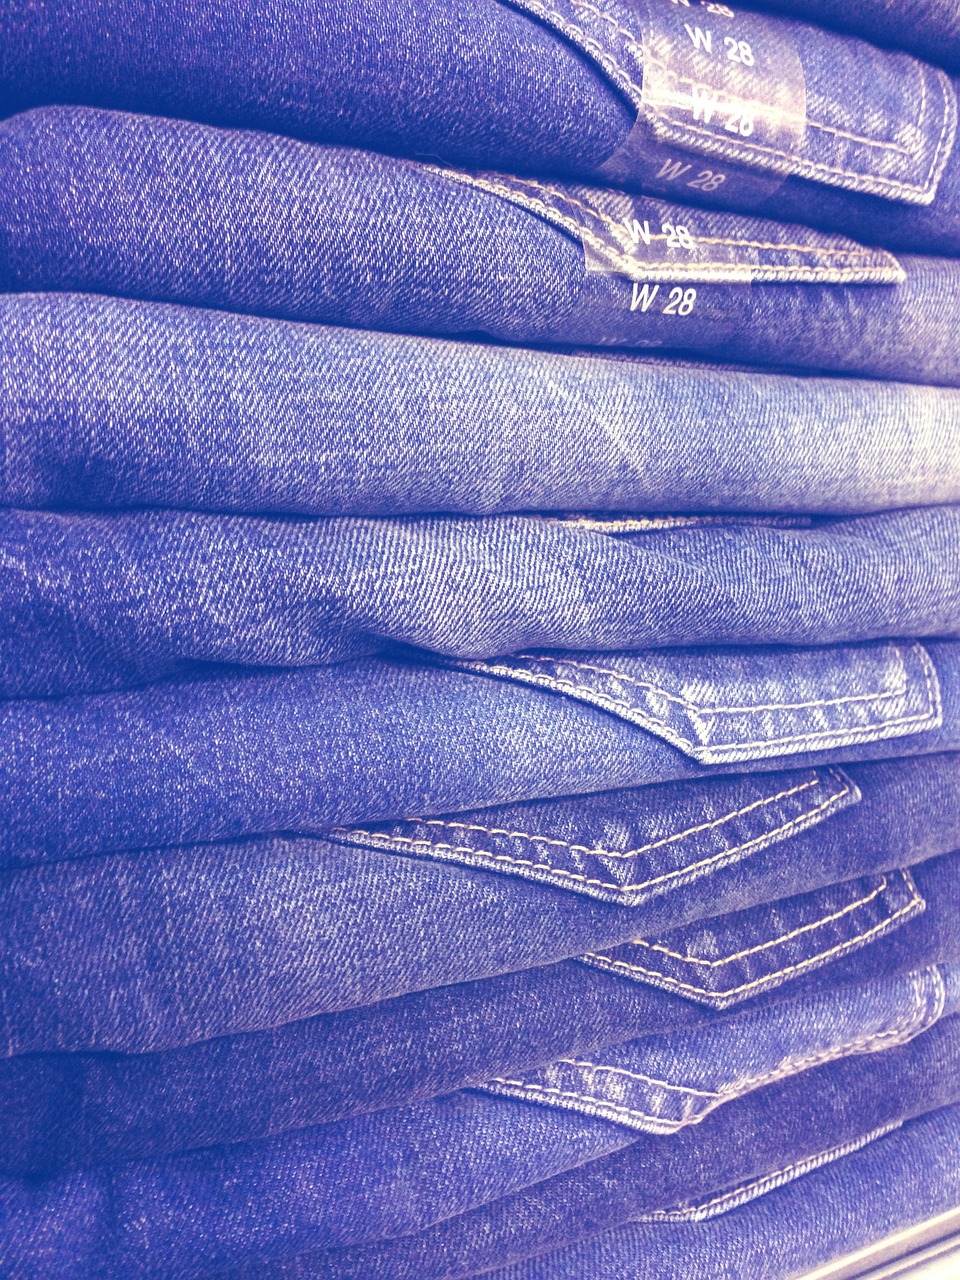 jeans jeans stack pants free photo